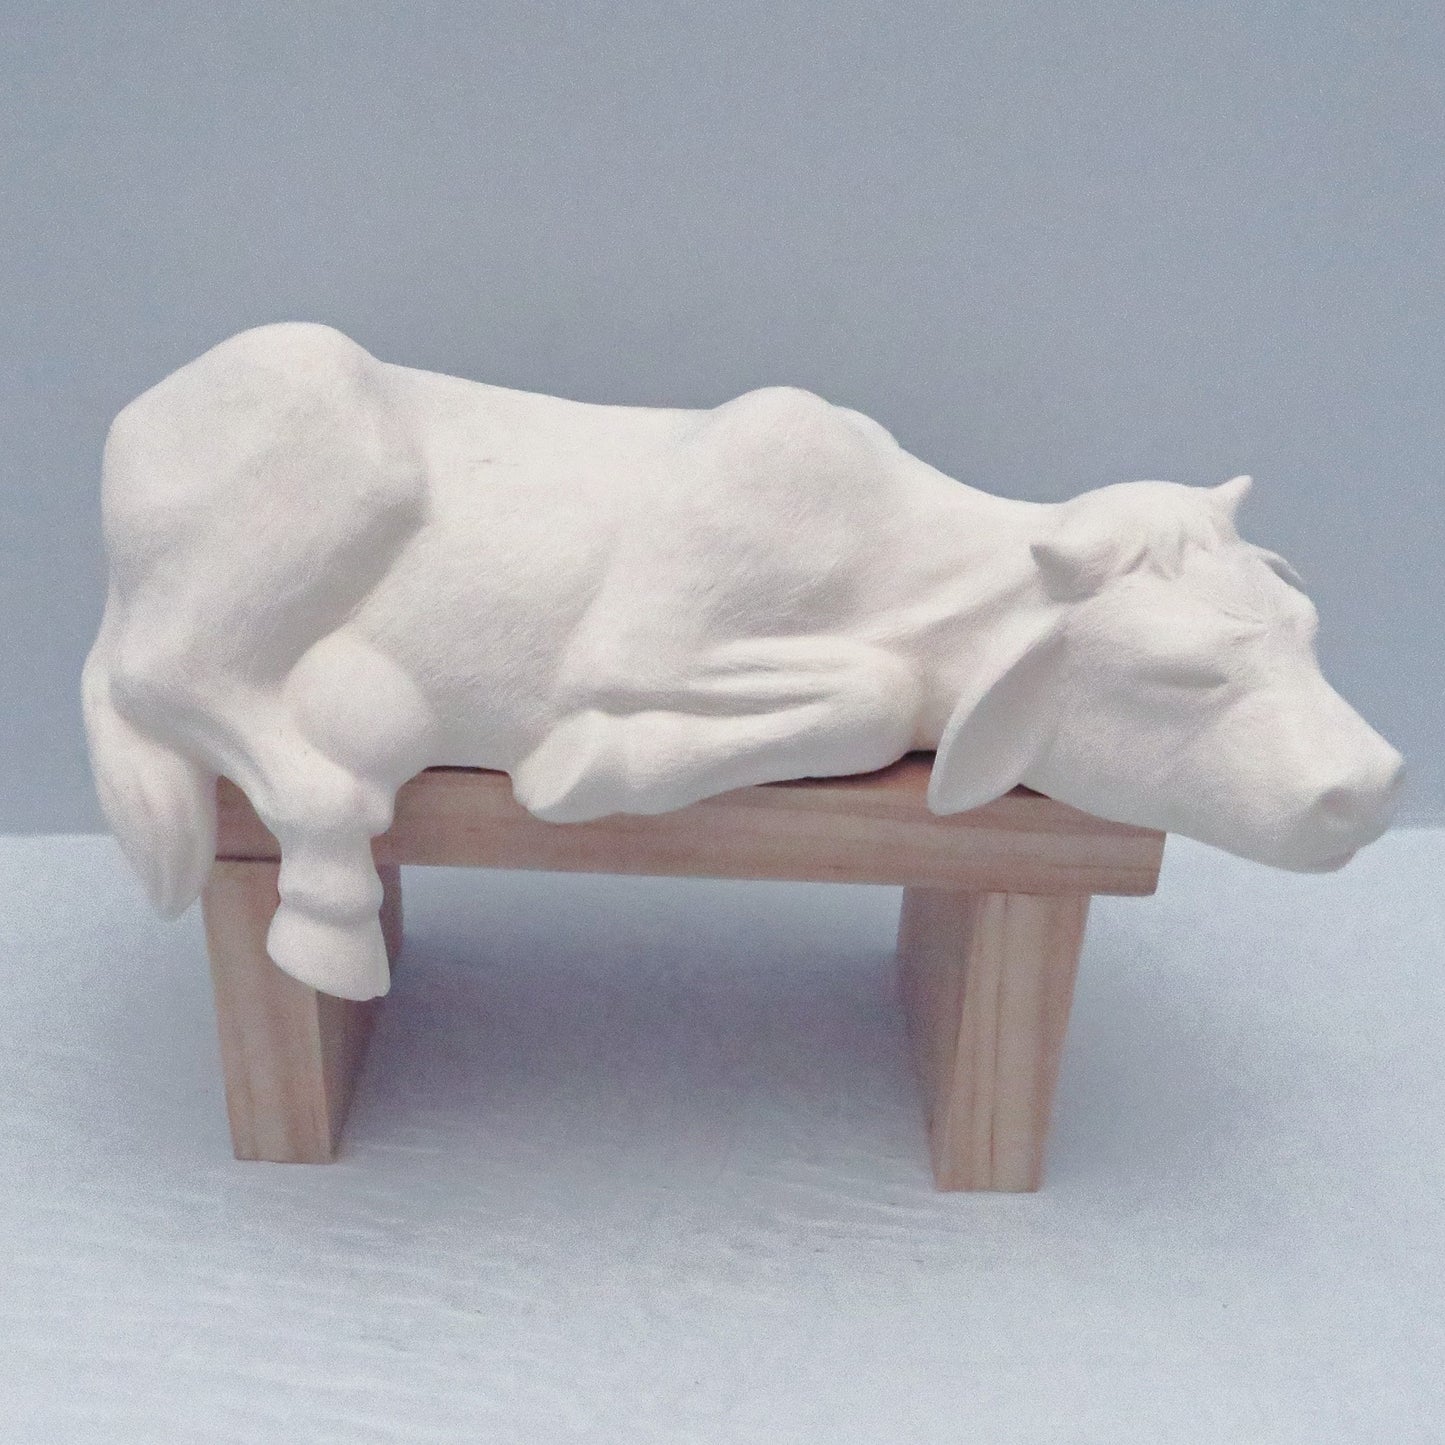 Large Handmade Ready to Paint Ceramic Sleepy Shelf Cow Figurine / Ceramic Cow to Paint / Cow Lover Gift / Cow Decor / Unpainted Bisqueware